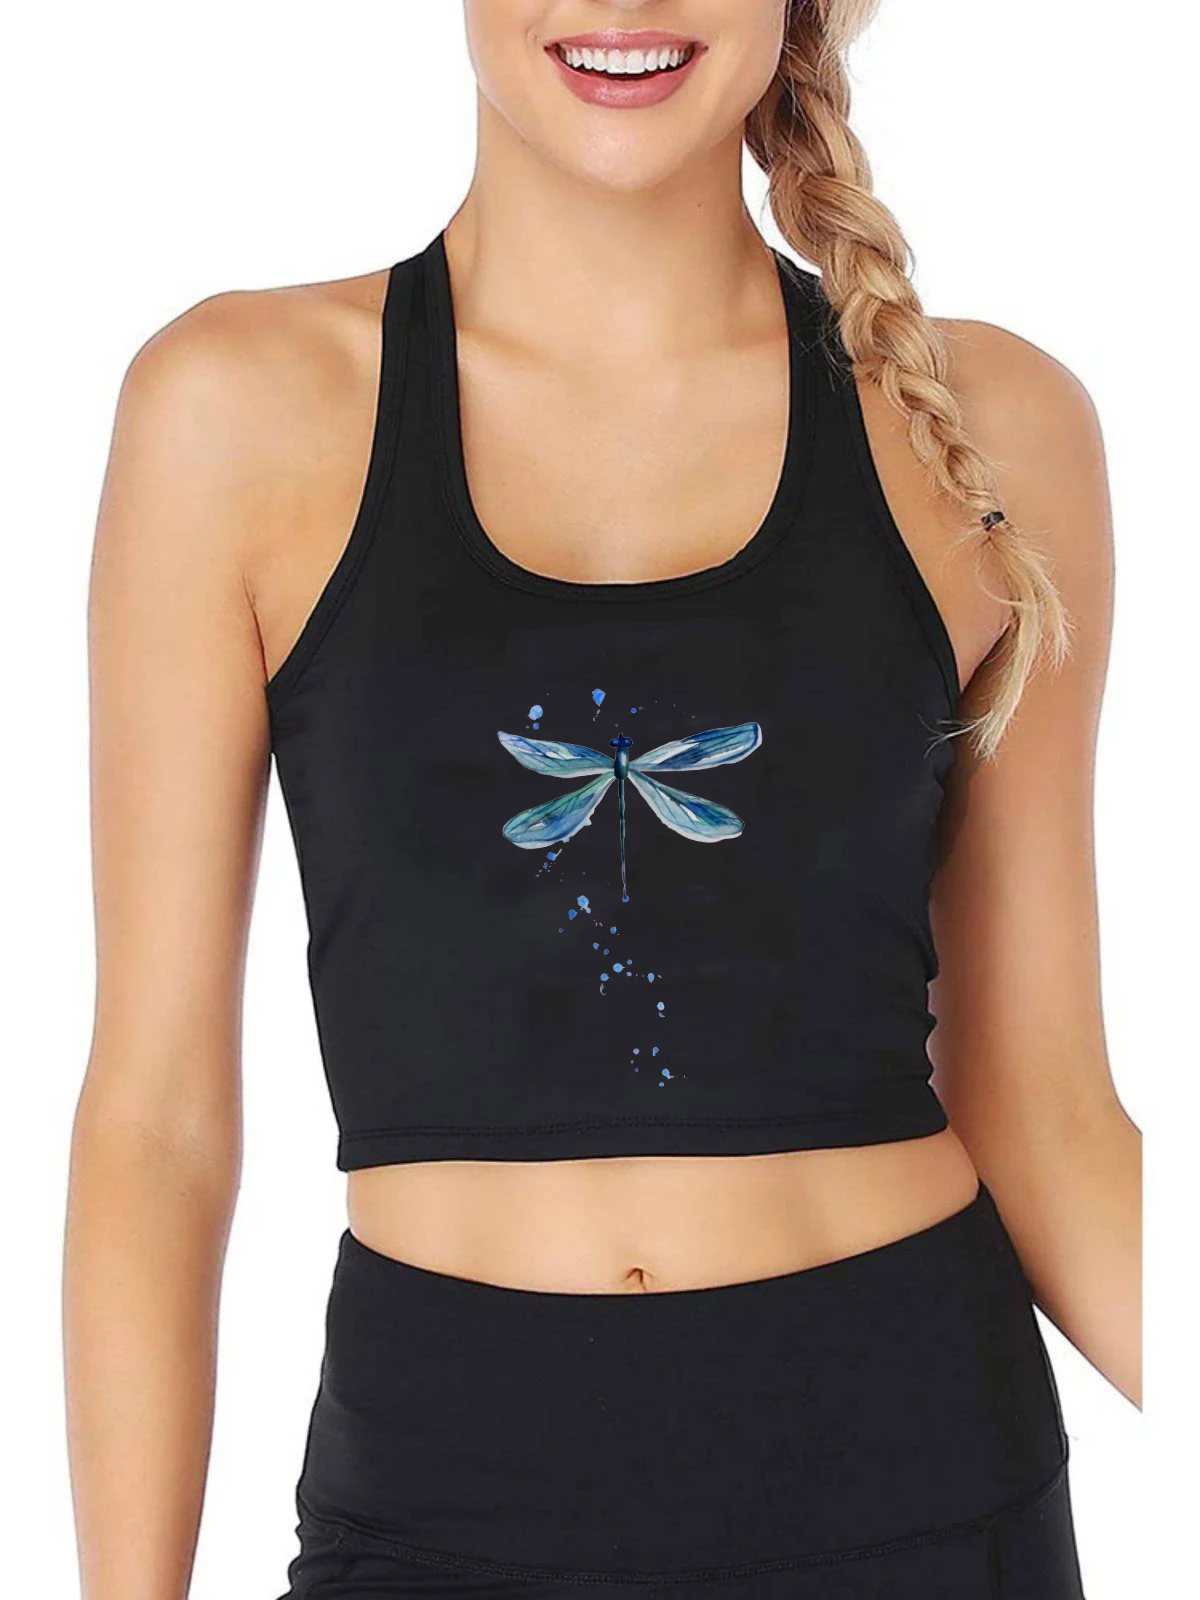 

Blue Dragonfly Graphic Sexy Slim Fit Crop Top Women's Yoga Sports Fitness Training Tank Tops Trend Cotton Breathable Camisole